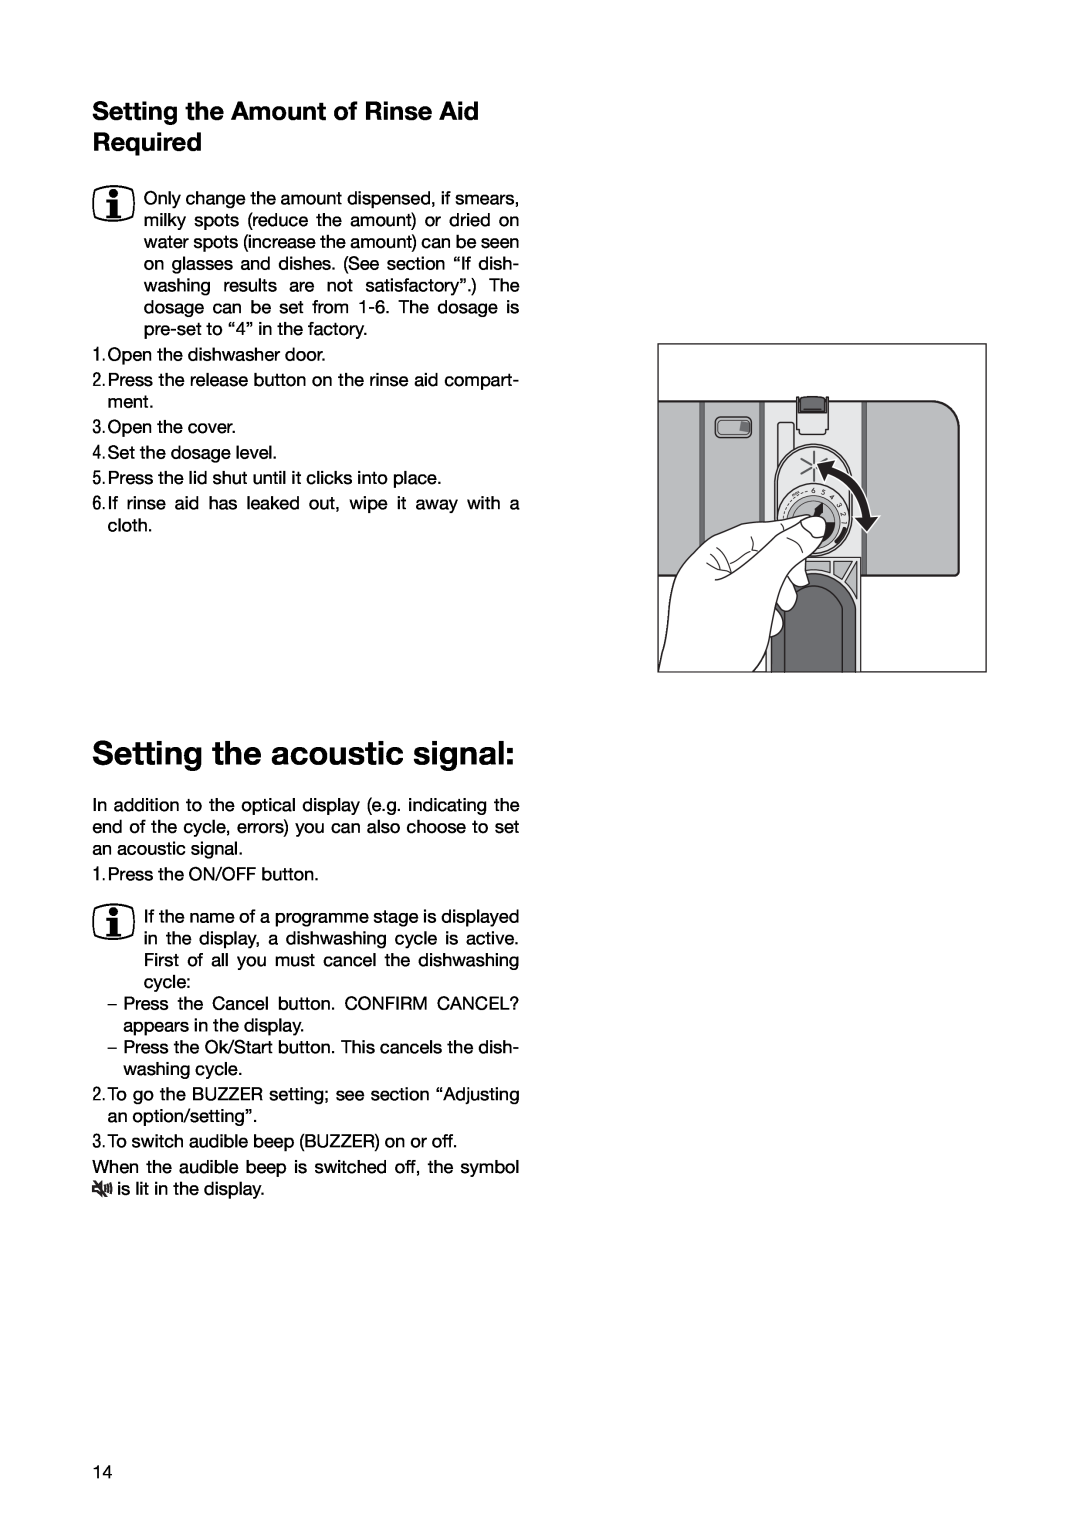 Zanussi ZSF 6280 manual Setting the acoustic signal, Setting the Amount of Rinse Aid Required 